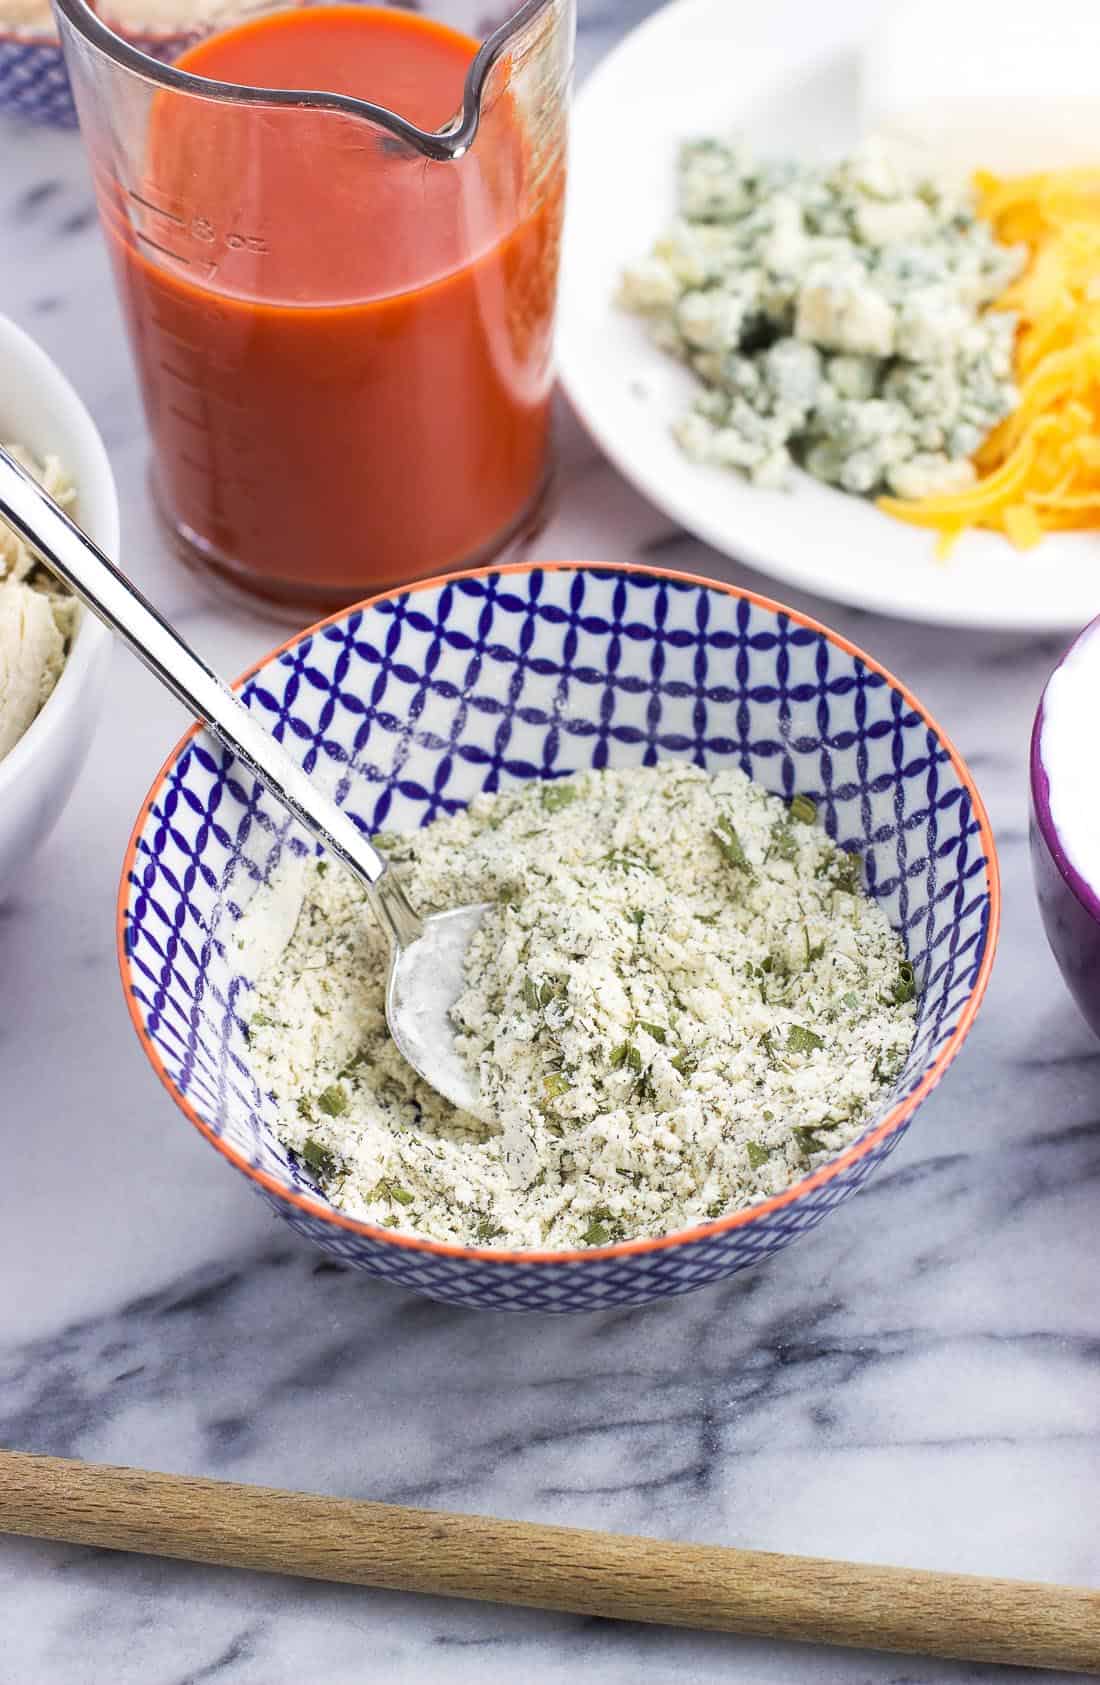 Homemade ranch seasoning in a small bowl with a spoon surrounded by other dip ingredients.